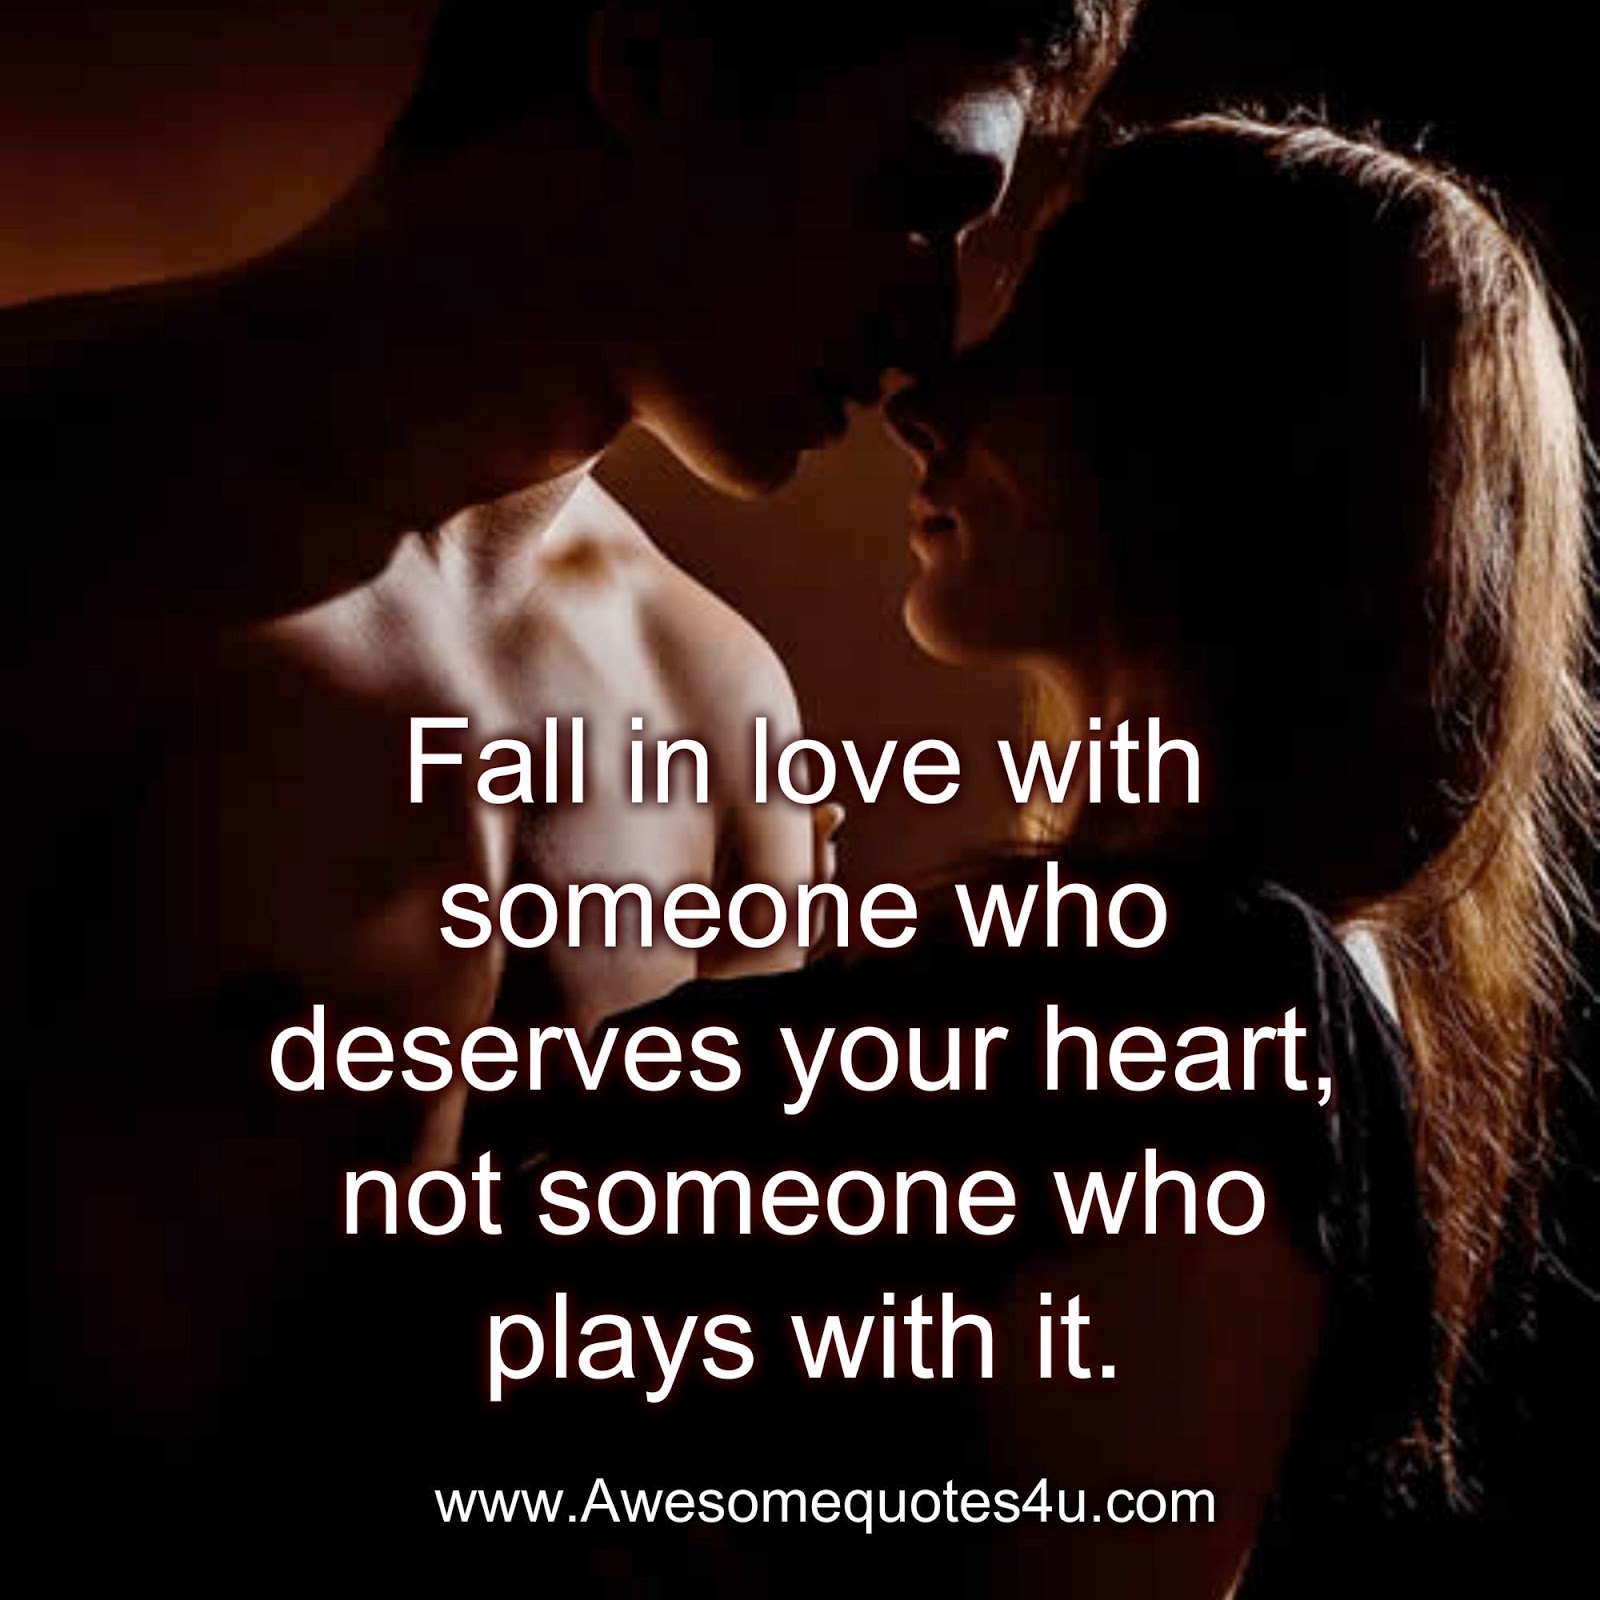 Awesomequotes4u.com: Definition of falling in love?